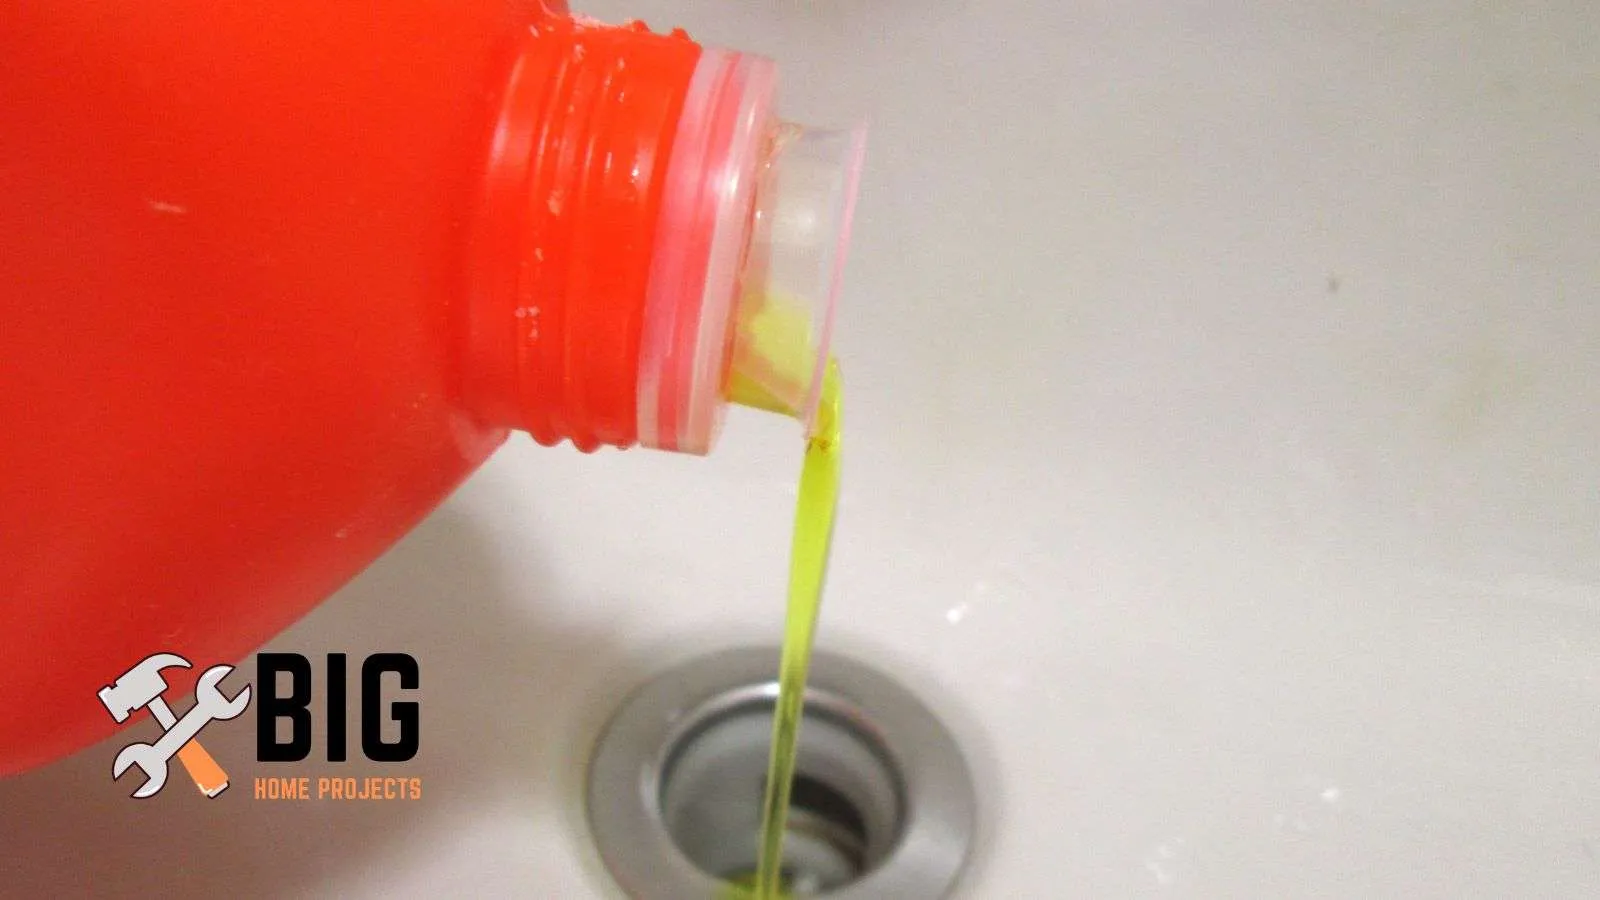 Plumber pouring drain cleaner into a sink drain - bighomeprojects.com